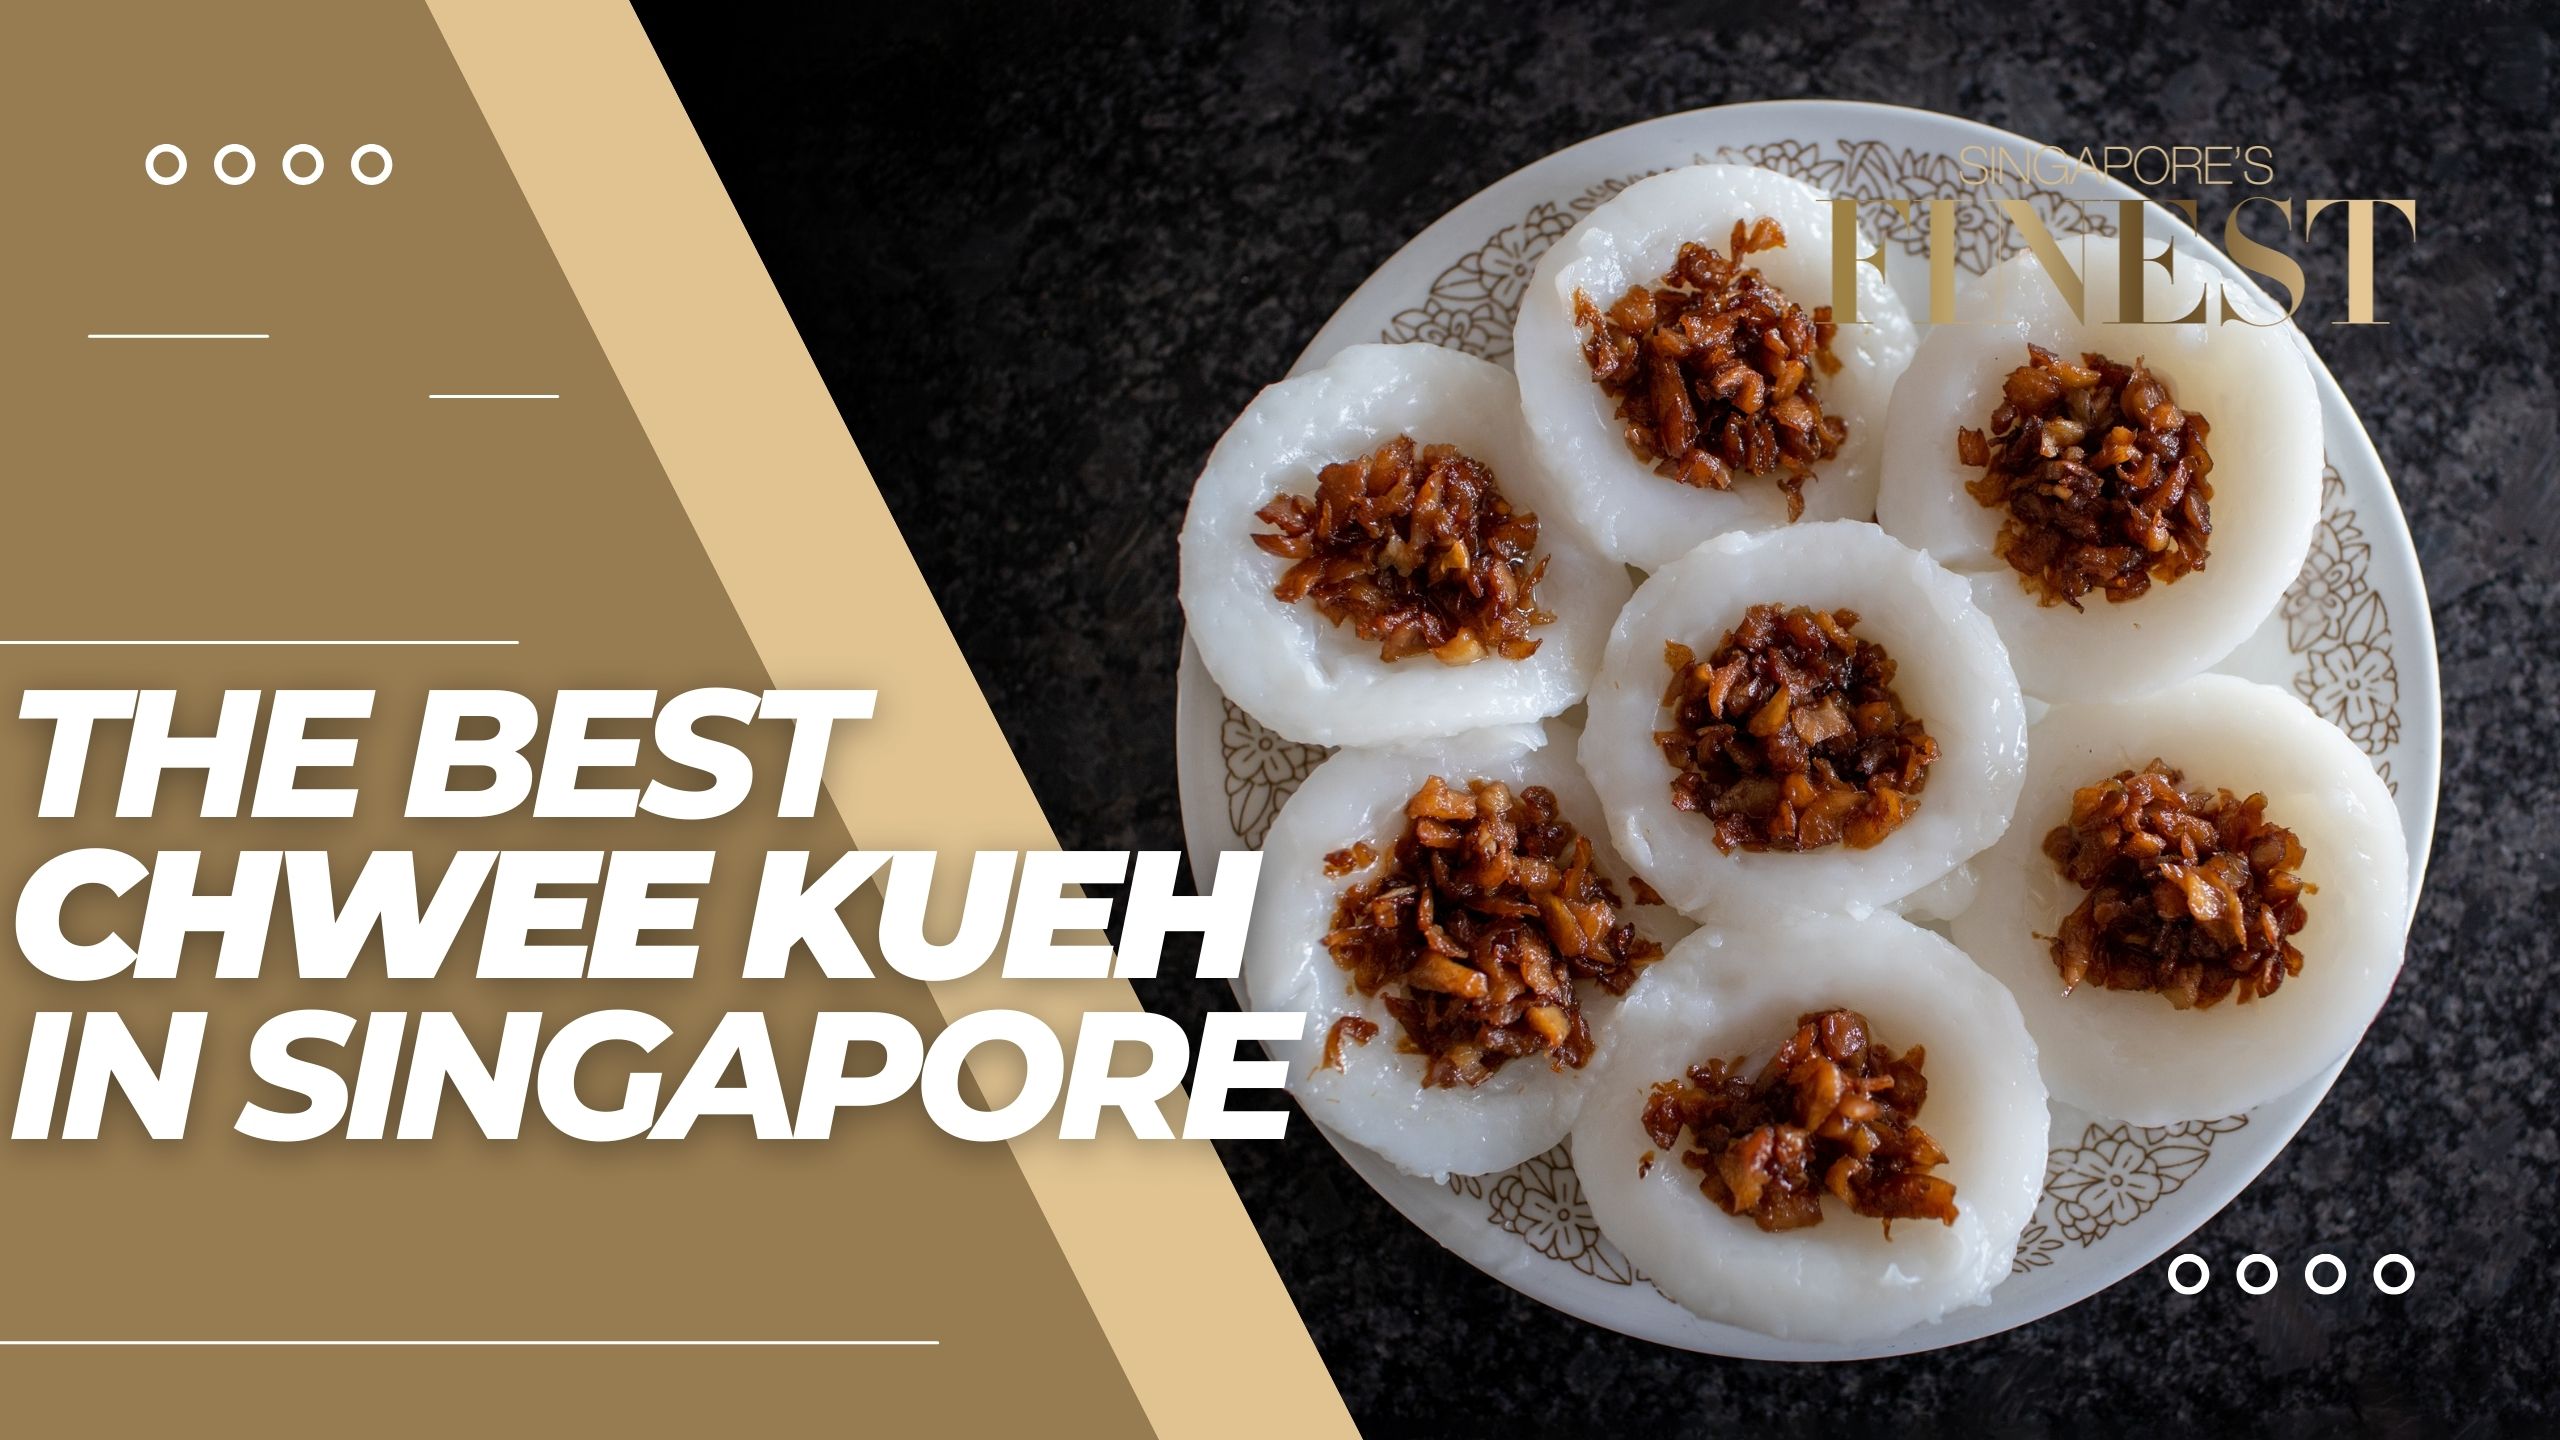 The Finest Chwee Kueh in Singapore